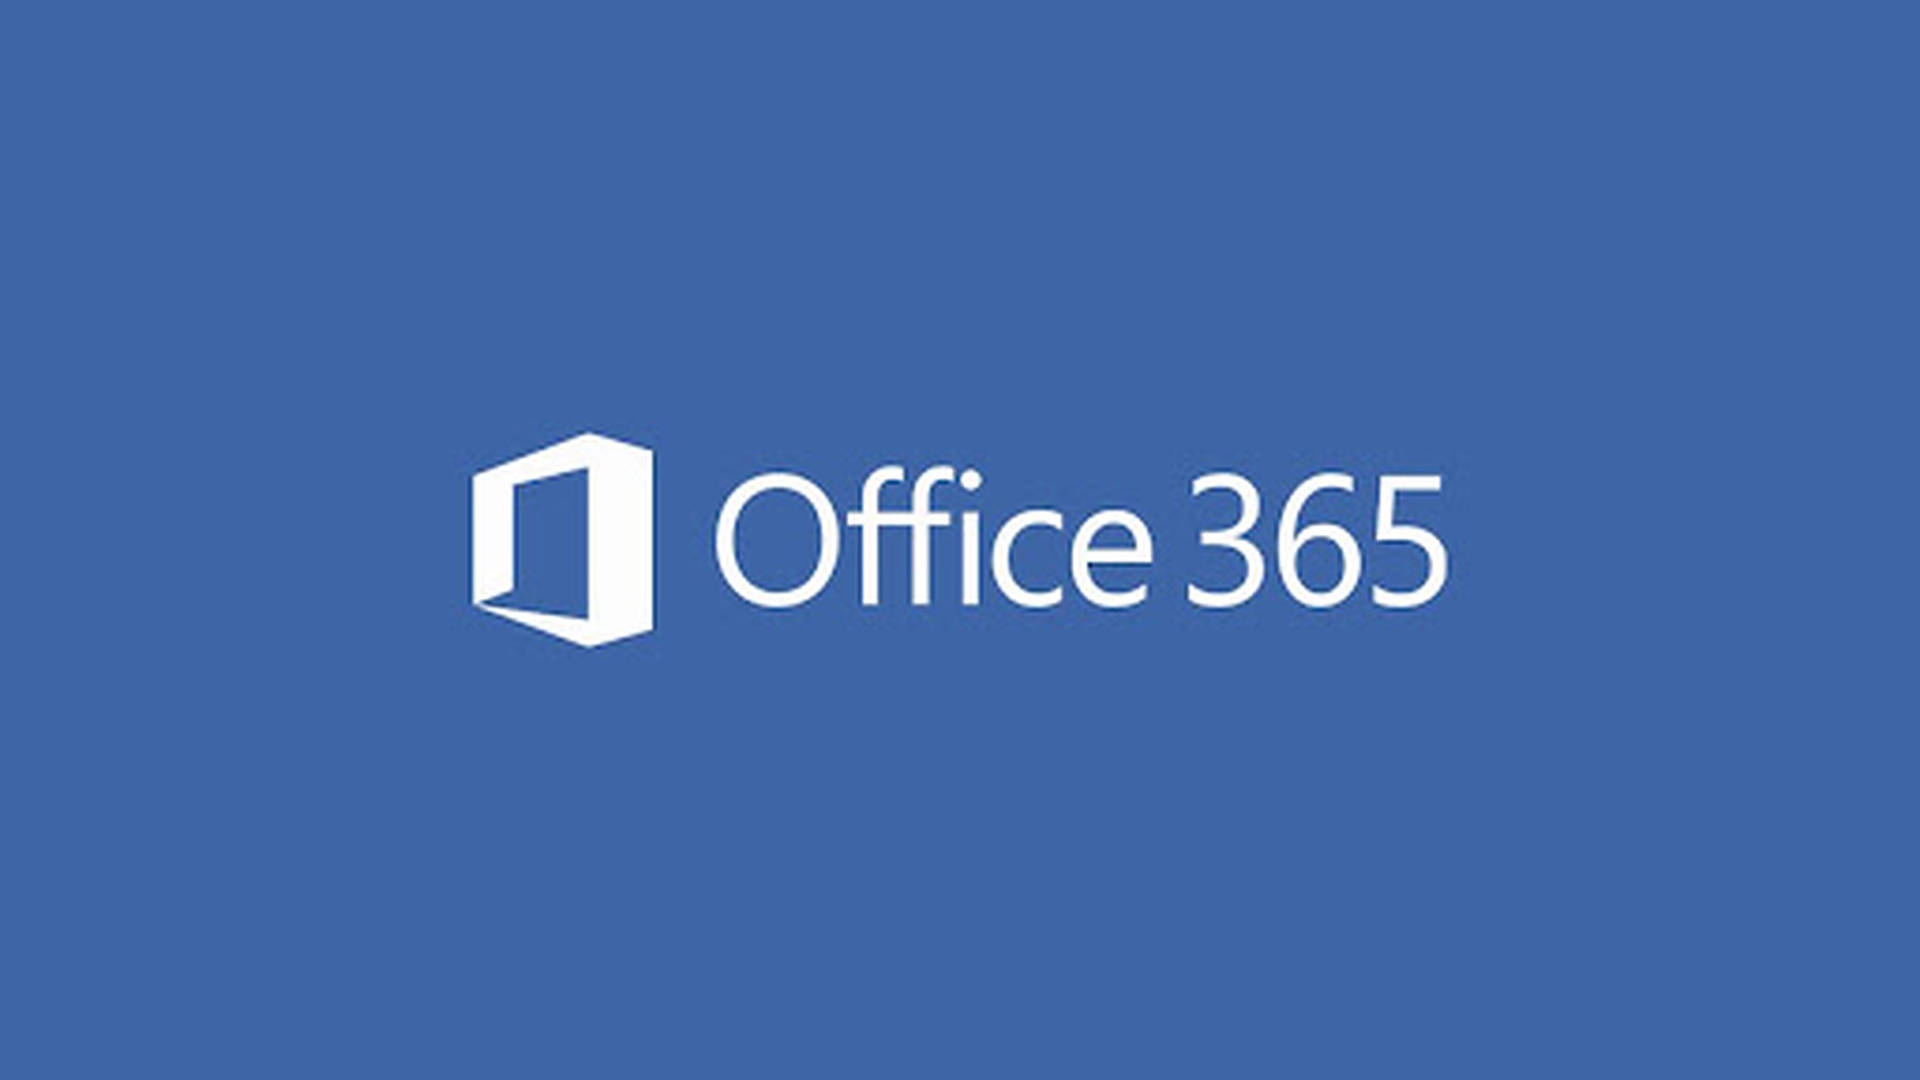 Office 365 Blue Poster Background